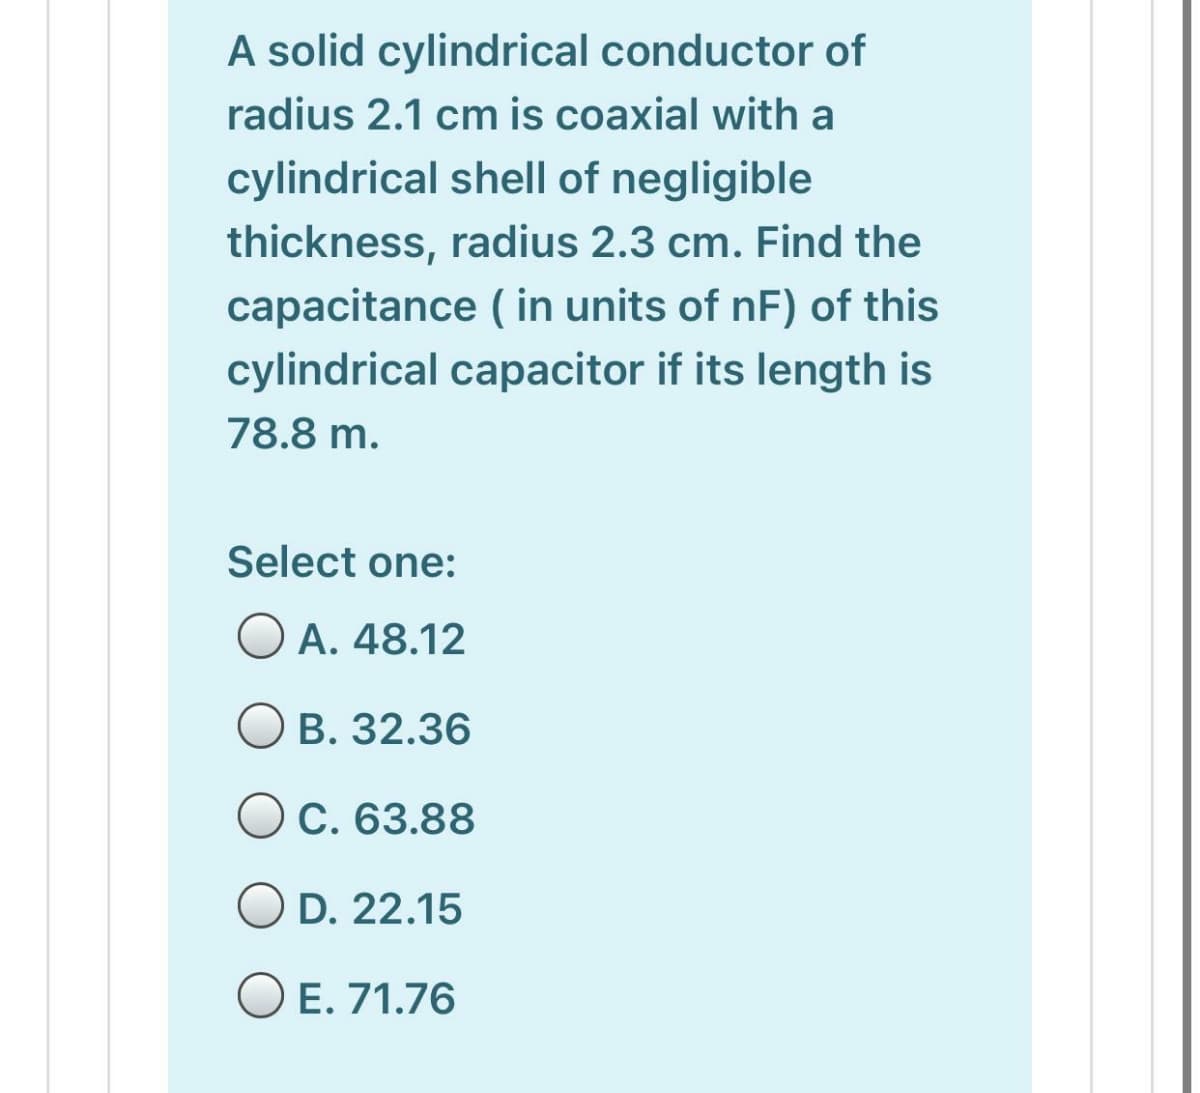 A solid cylindrical conductor of
radius 2.1 cm is coaxial with a
cylindrical shell of negligible
thickness, radius 2.3 cm. Find the
capacitance ( in units of nF) of this
cylindrical capacitor if its length is
78.8 m.
Select one:
O A. 48.12
O B. 32.36
Oc. 63.88
OD. 22.15
O E. 71.76
